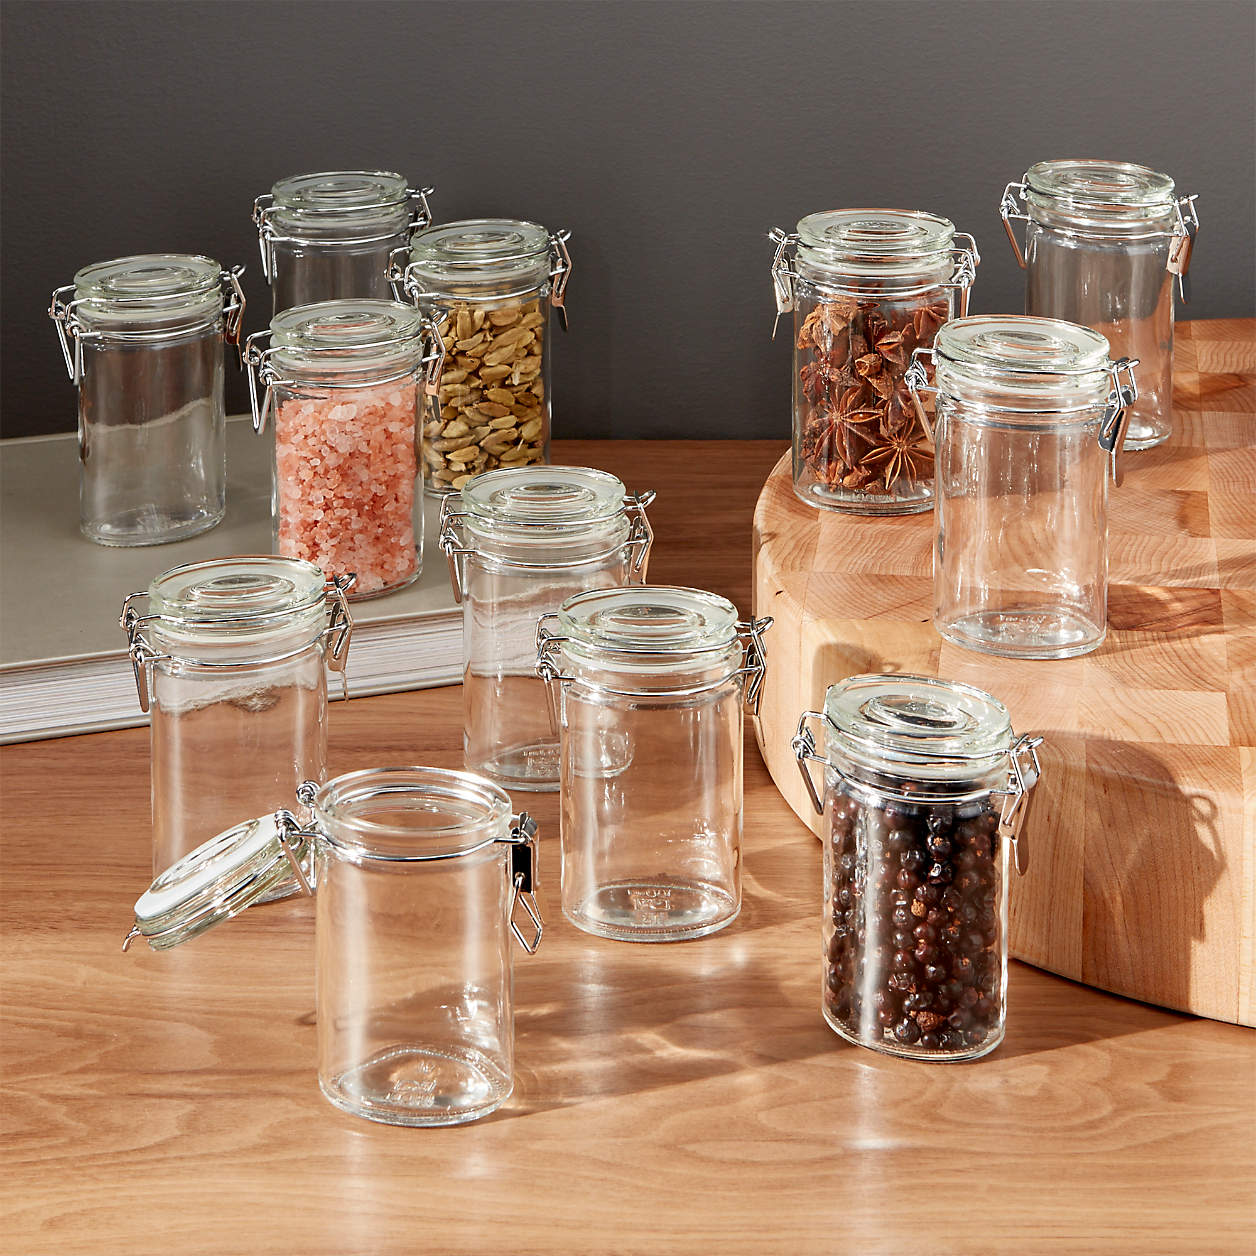 http://cdn.apartmenttherapy.info/image/upload/v1674243042/gen-workflow/product-database/mini-oval-spice-herb-jars-with-clamp-set-of-12-crate-and-barrel.jpg